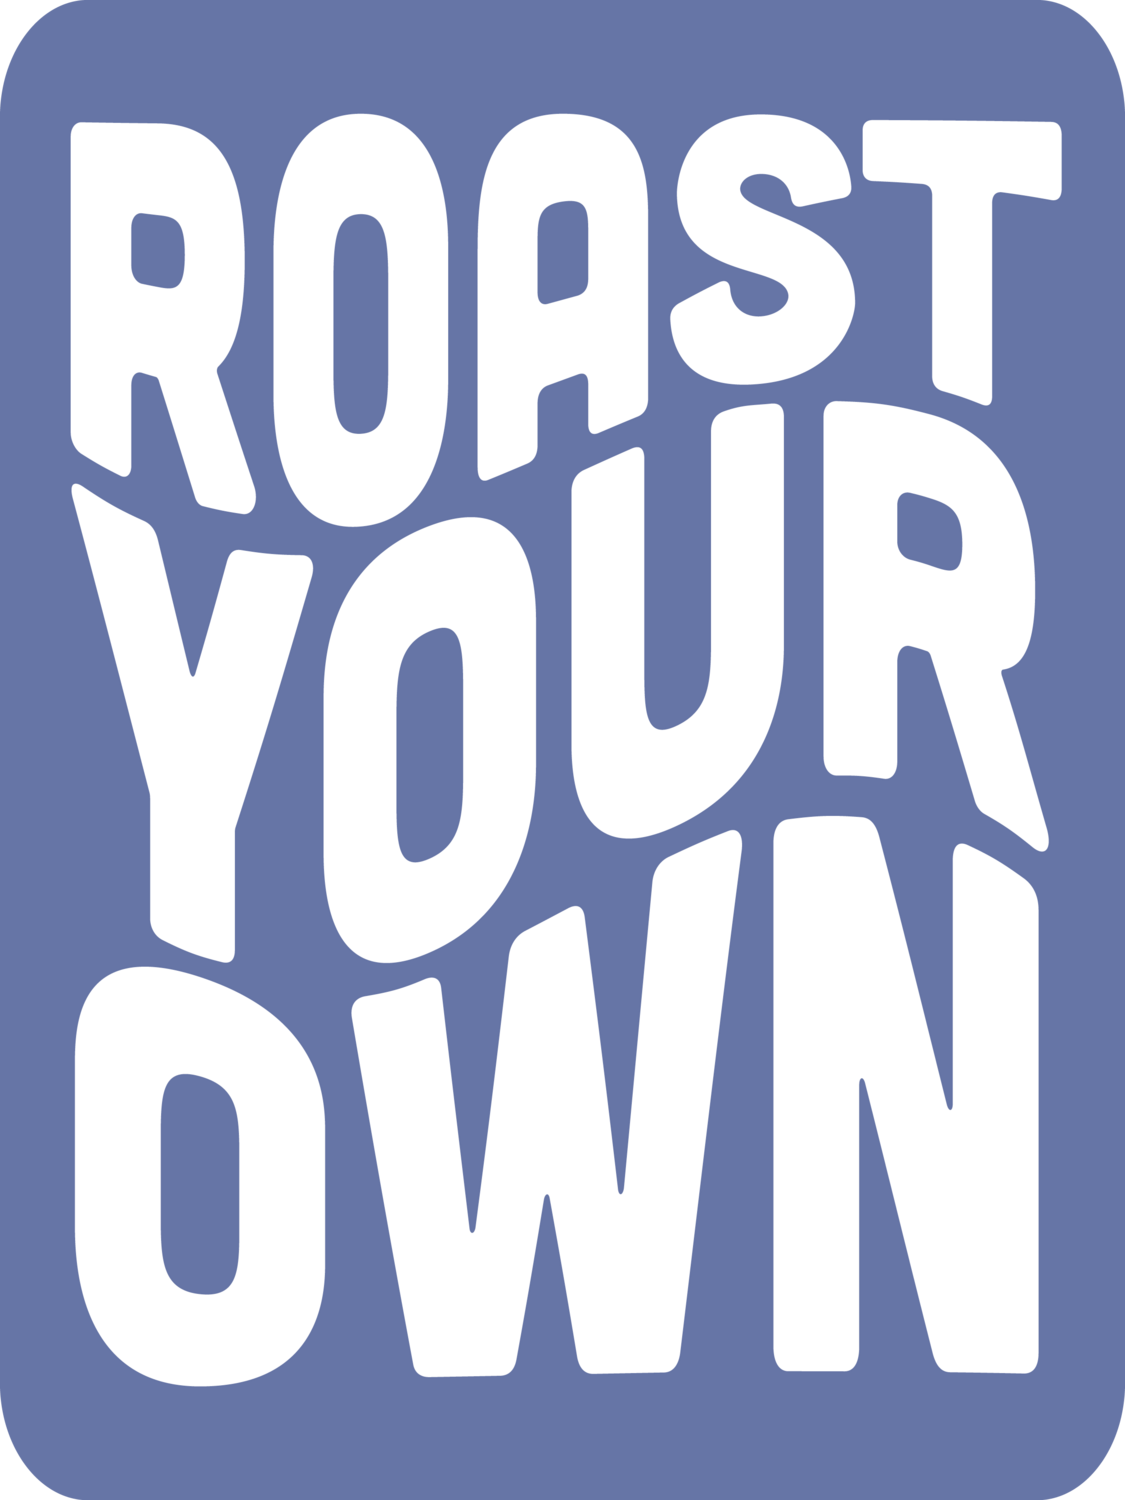 ROAST YOUR OWN - AVAILABLE FROM FEBRUARY